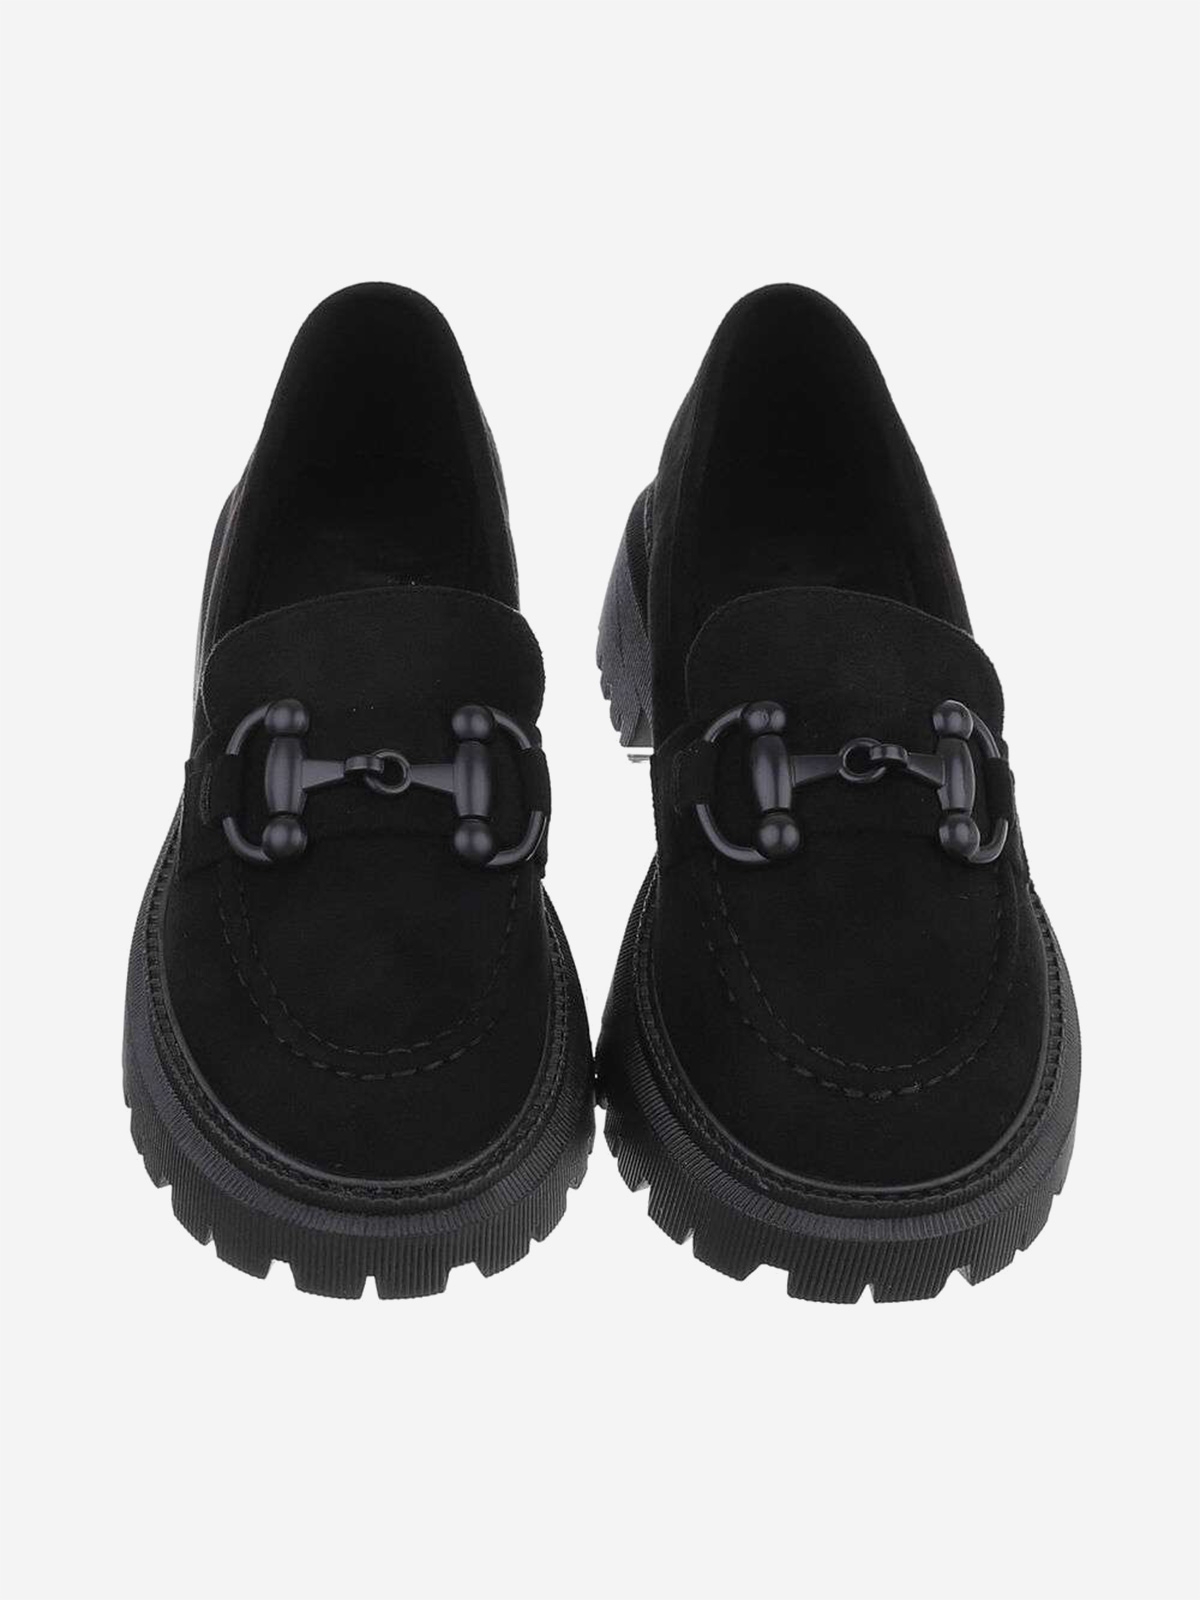 Women's moccasins with a decorative accent on the front in black